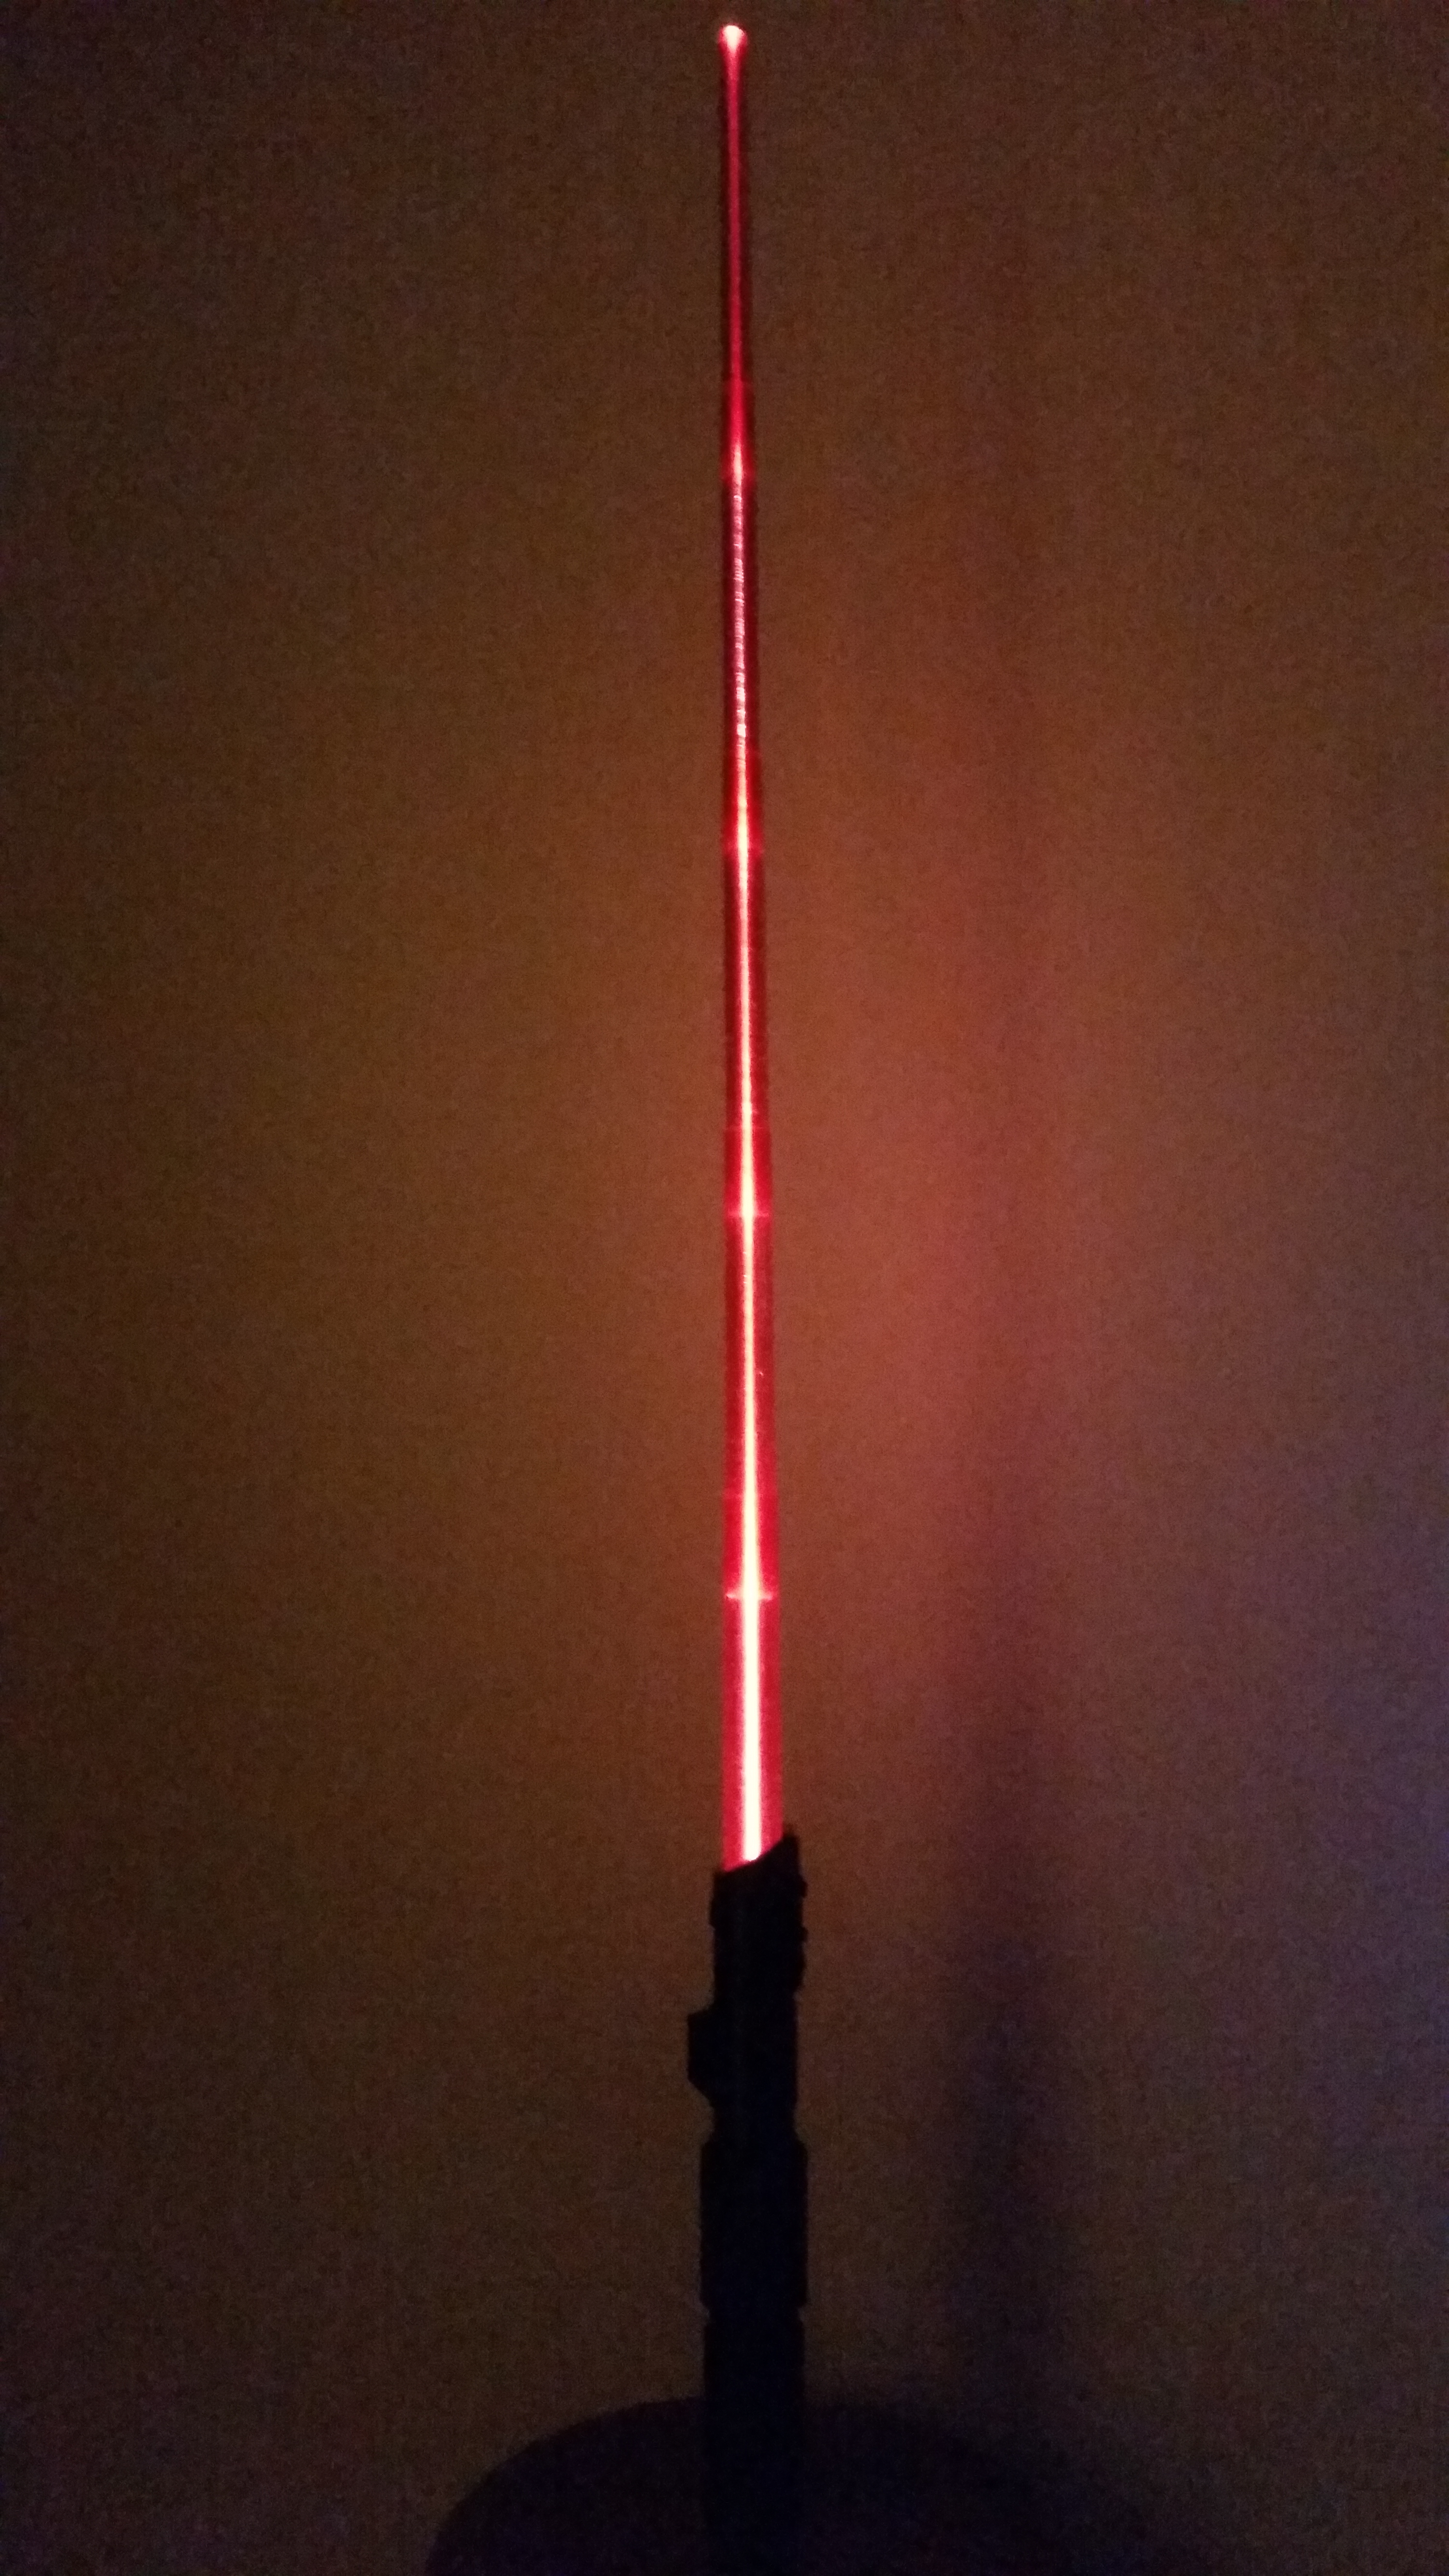 Flashlight mod for the Collapsing Sith Lightsaber